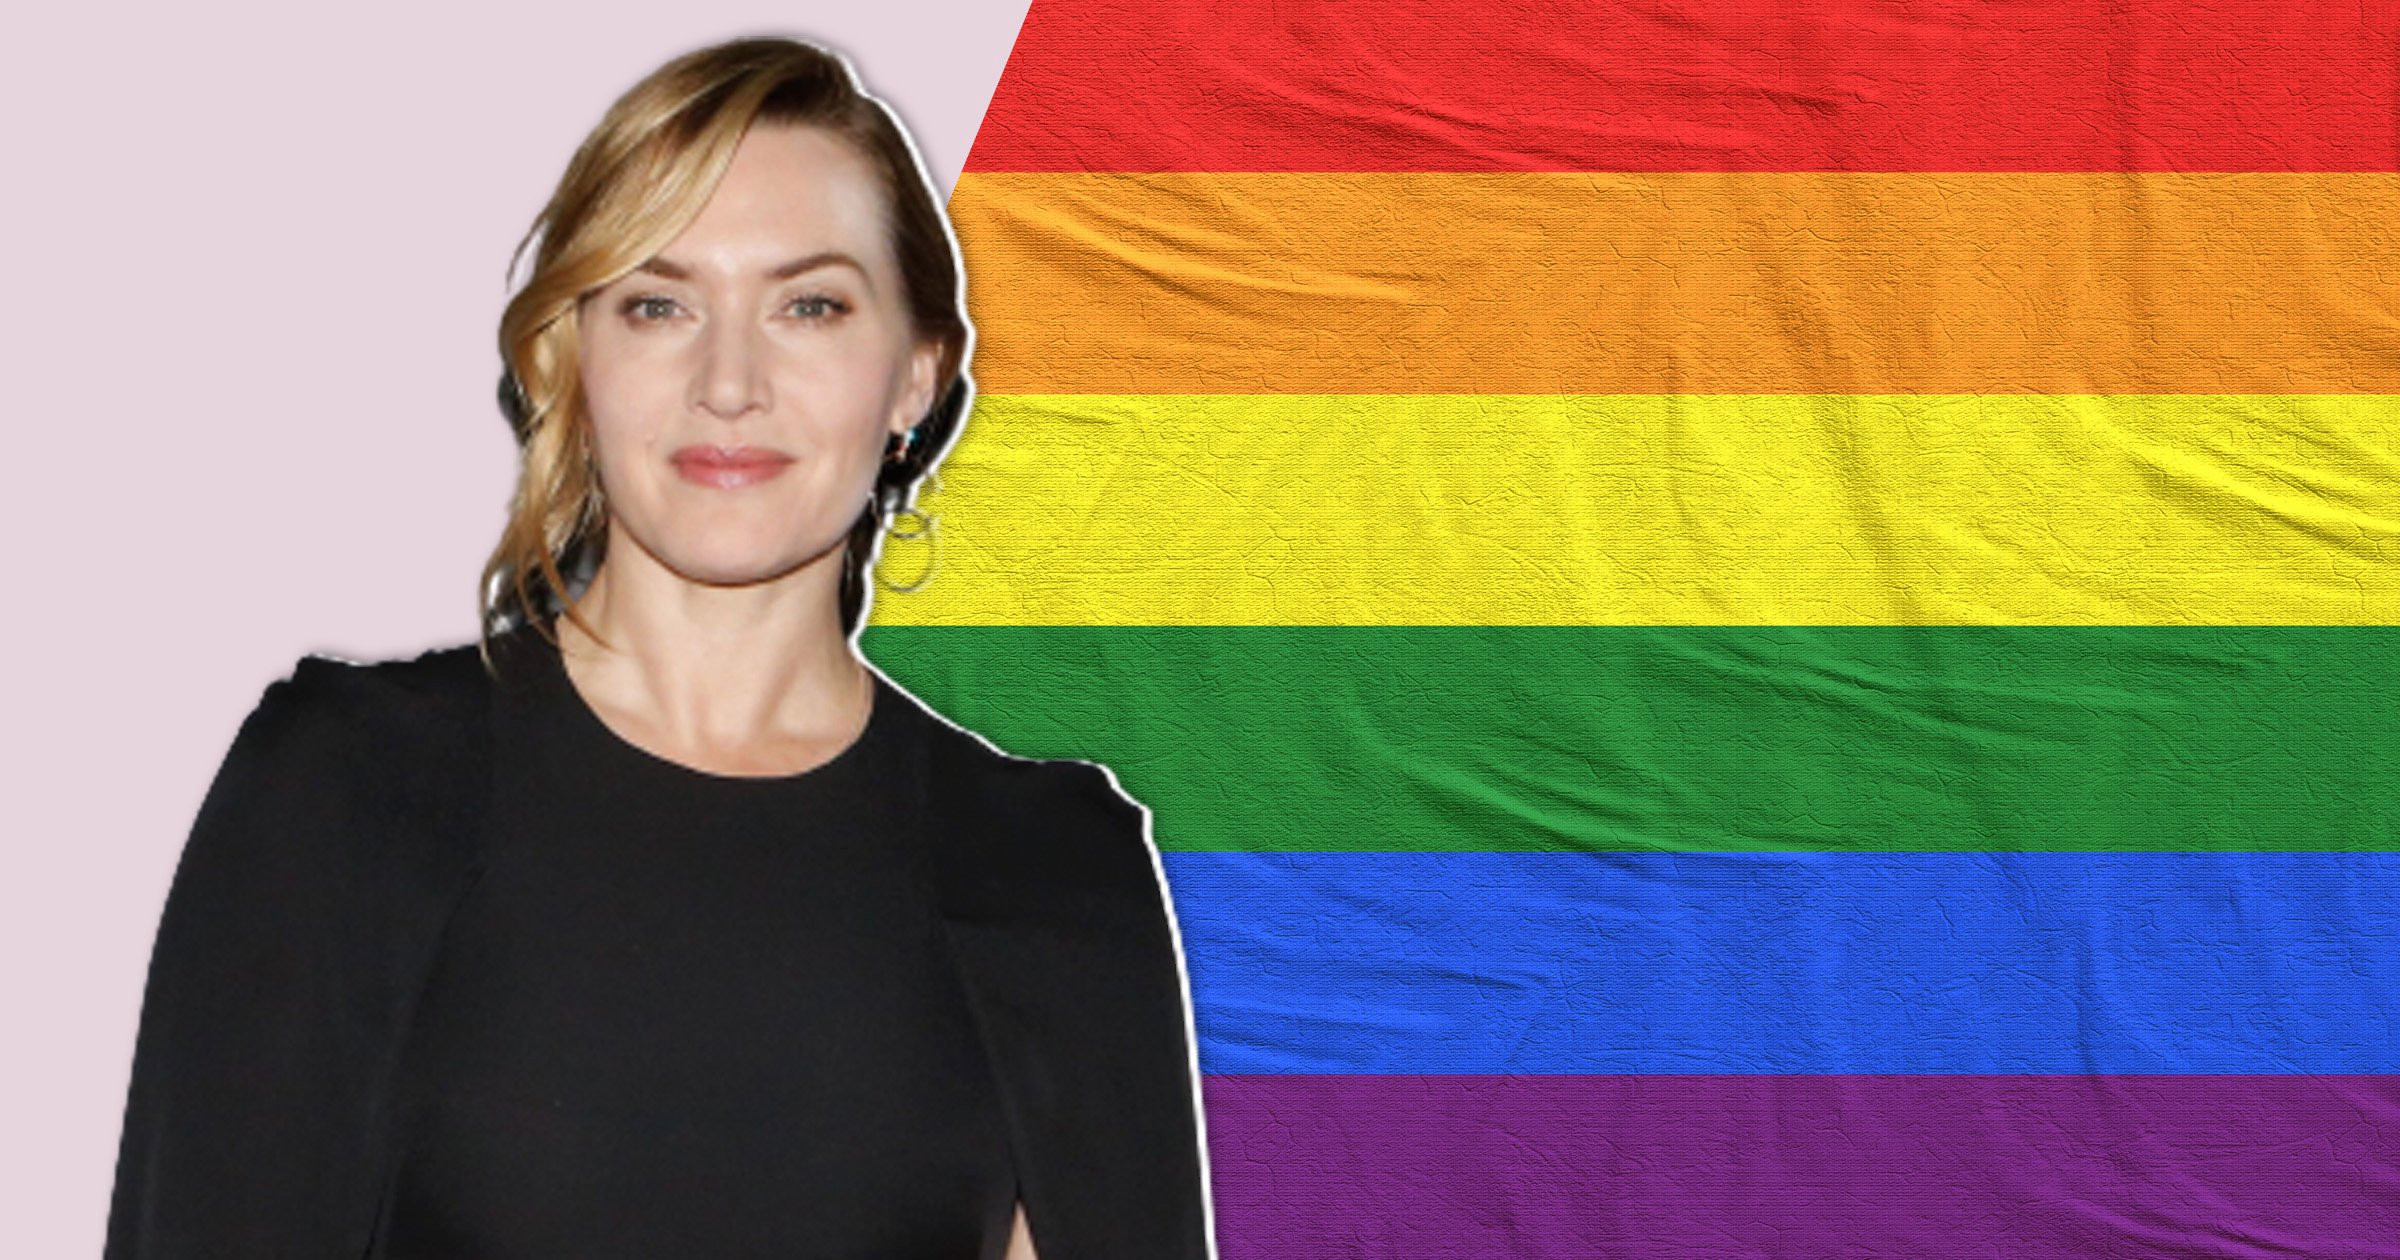 Kate Winslet claims she knows gay Hollywood actors who fear coming out in case they lose career